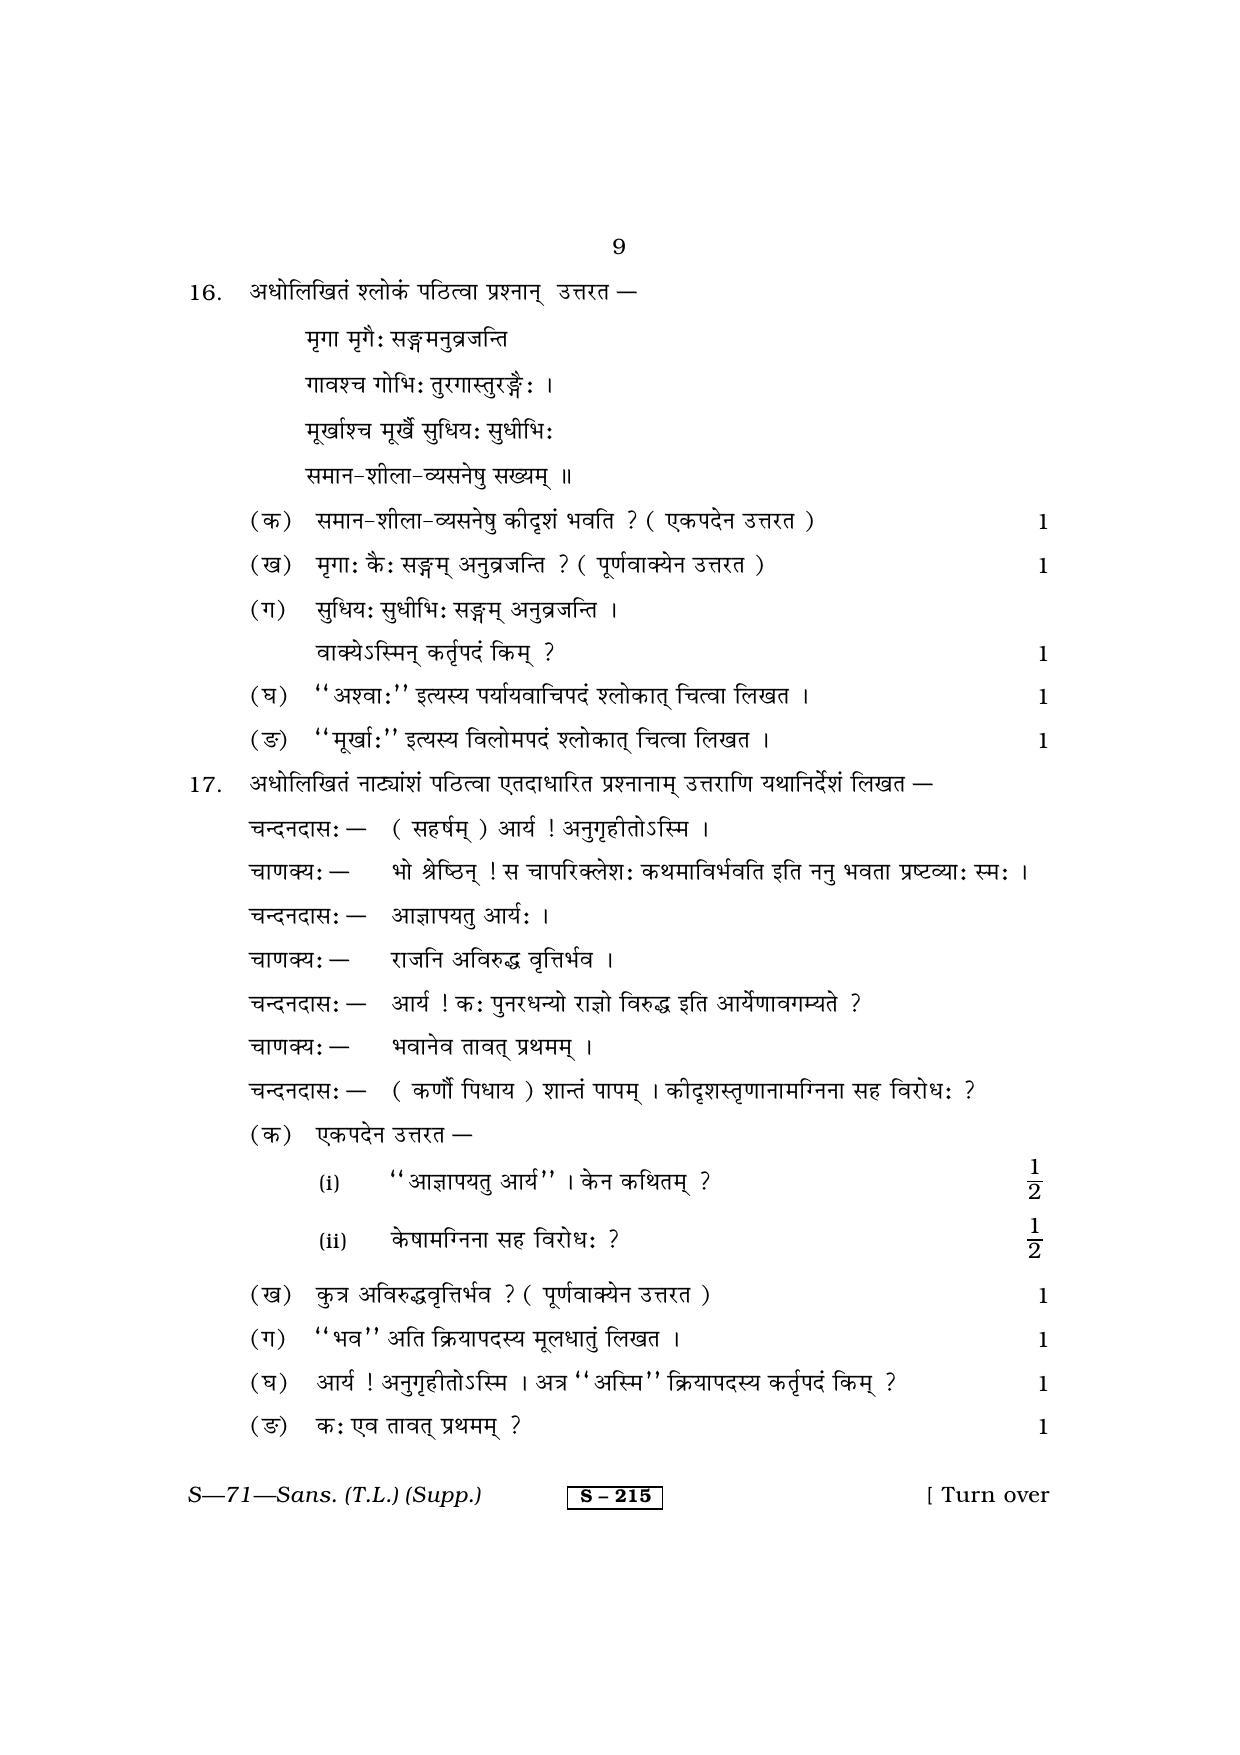 RBSE Class 10 Sanskrit (T.L.) Supplementary 2013 Question Paper - Page 9